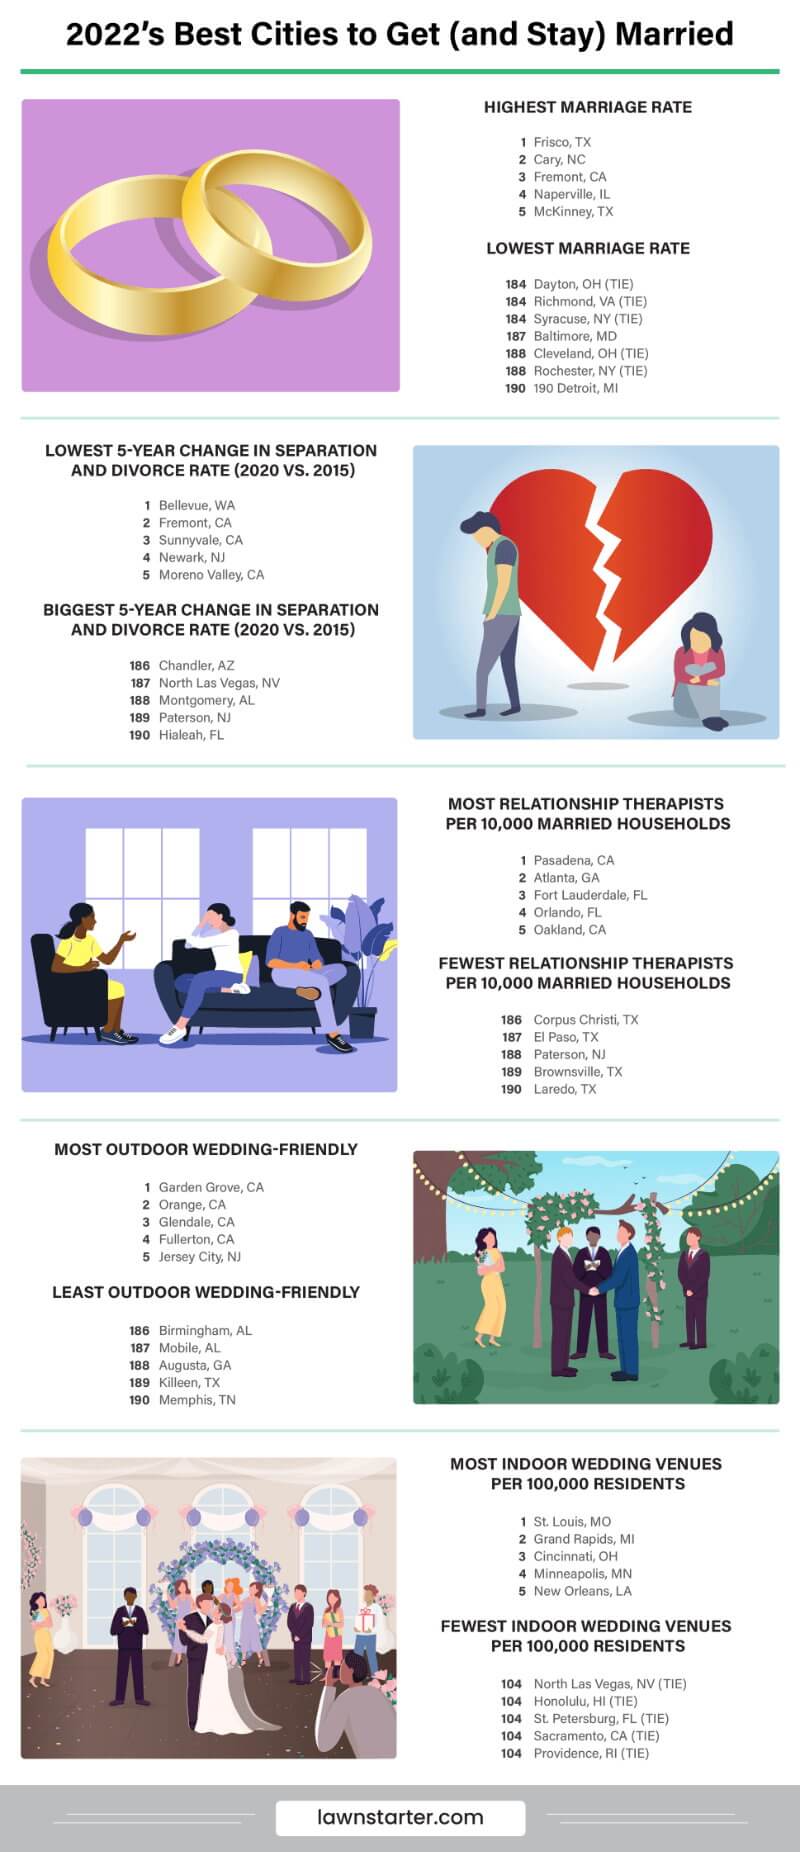 2022's Best Cities to Get (and Stay) Married Infographic is based on marriage rate, divorces, relationship therapists, and more! 